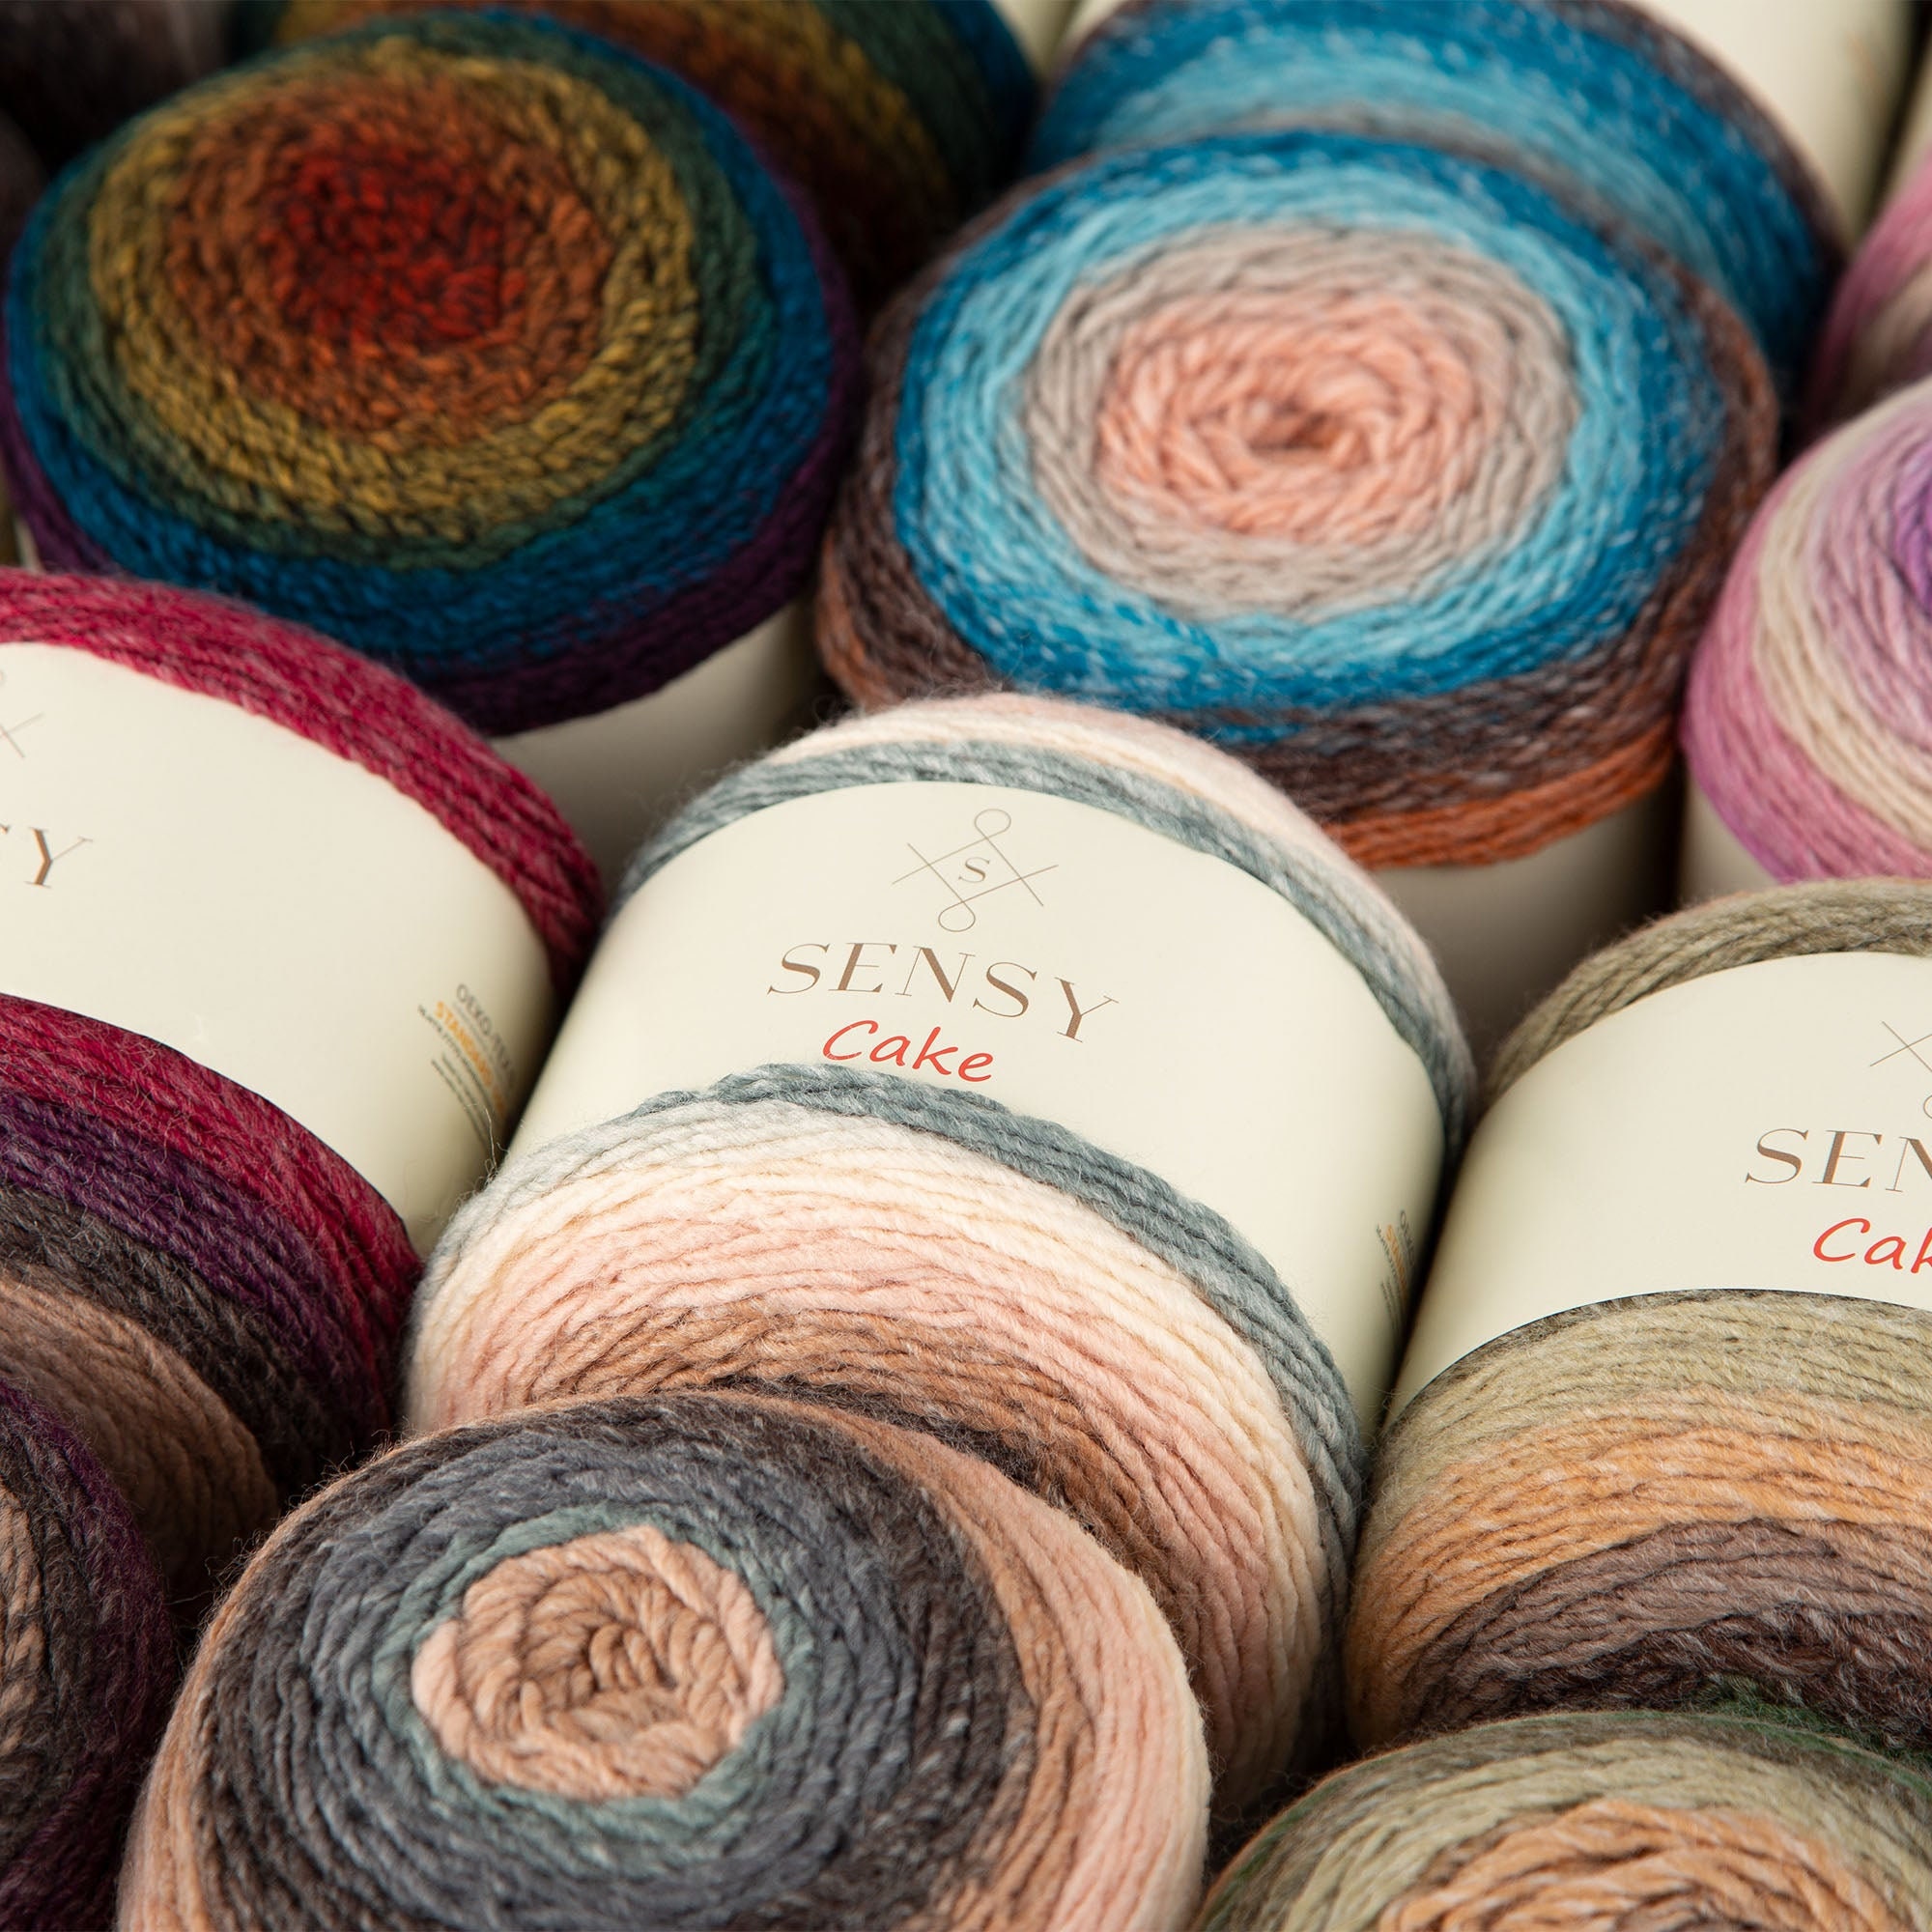 Cake yarn - what is it?